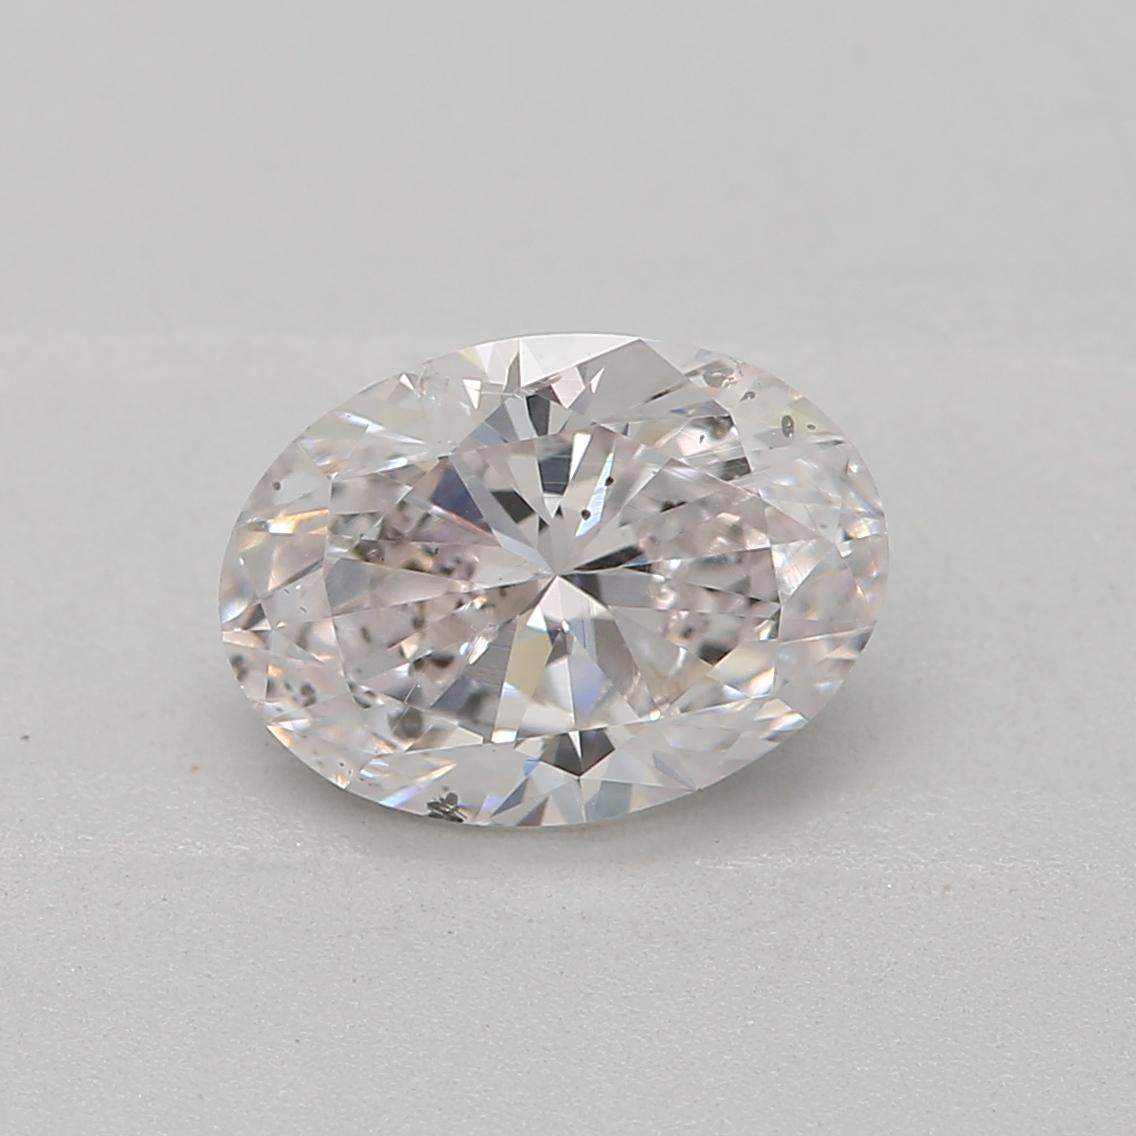 *100% NATURAL FANCY COLOUR DIAMOND*

✪ Diamond Details ✪

➛ Shape: Oval
➛ Colour Grade: Faint Pink
➛ Carat: 0.72
➛ Clarity: I1
➛ GIA Certified 

^FEATURES OF THE DIAMOND^

This 0.72 carat diamond falls within the range of small to medium-sized